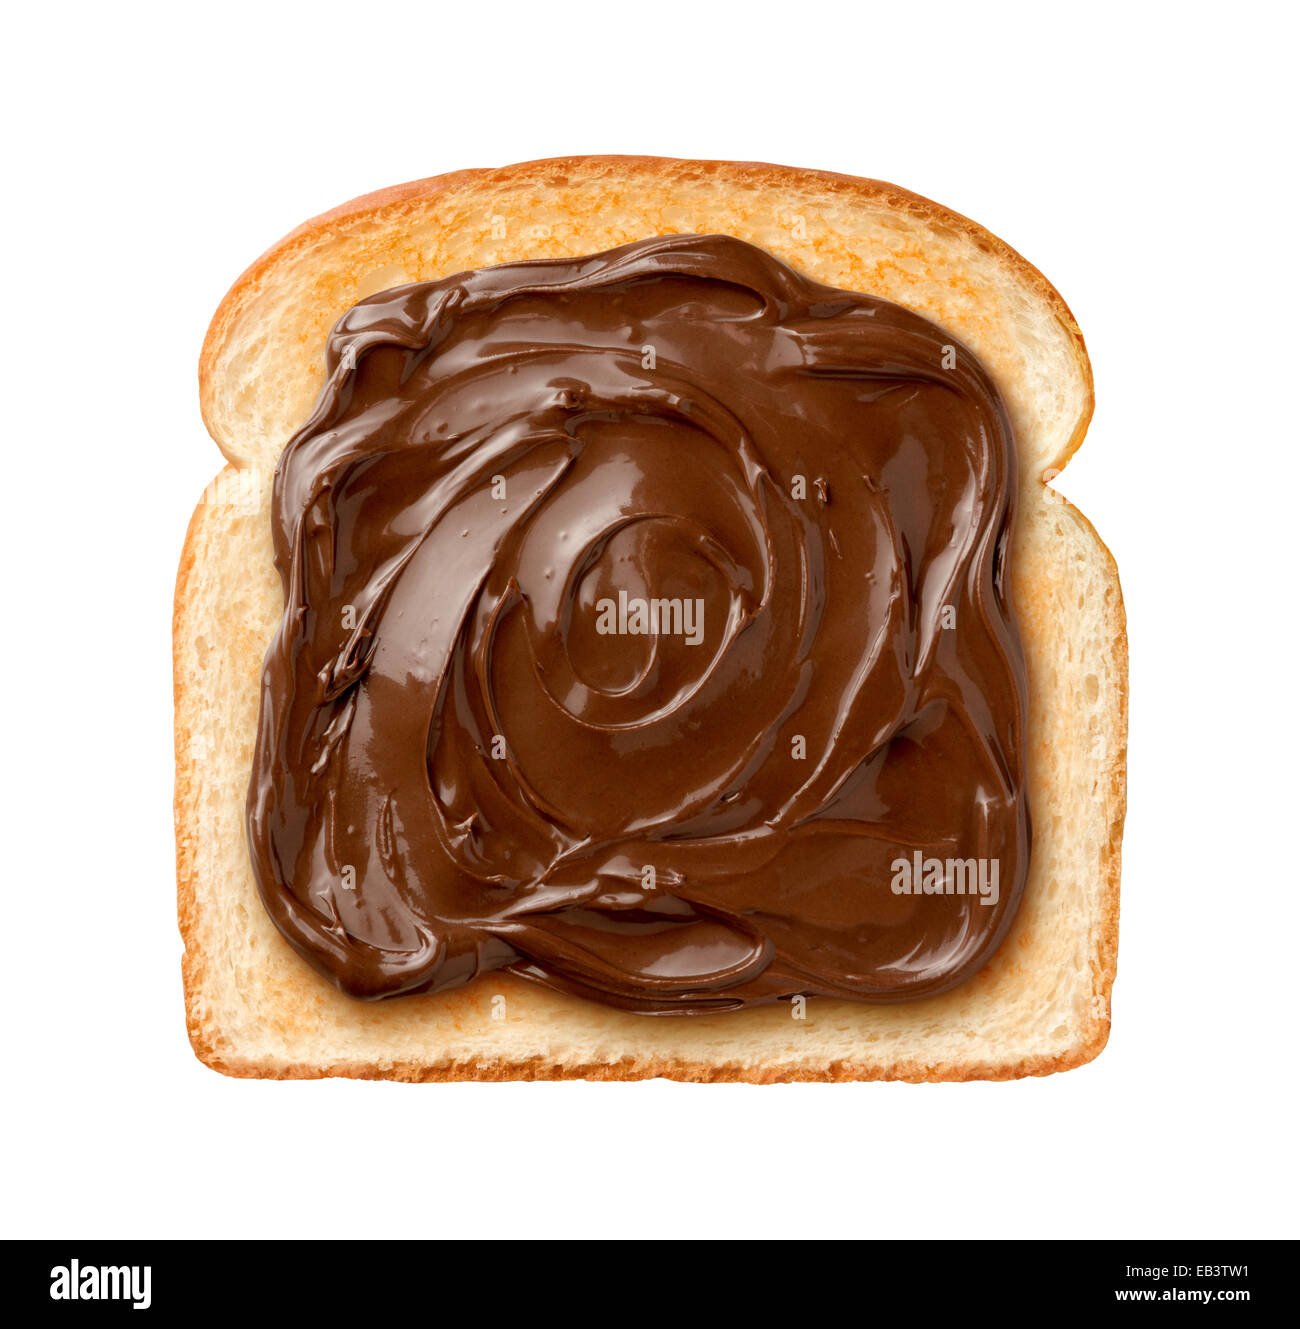 Aerial view of Chocolate Spread on a single slice of Toast. Isolated on a white background Stock Photo